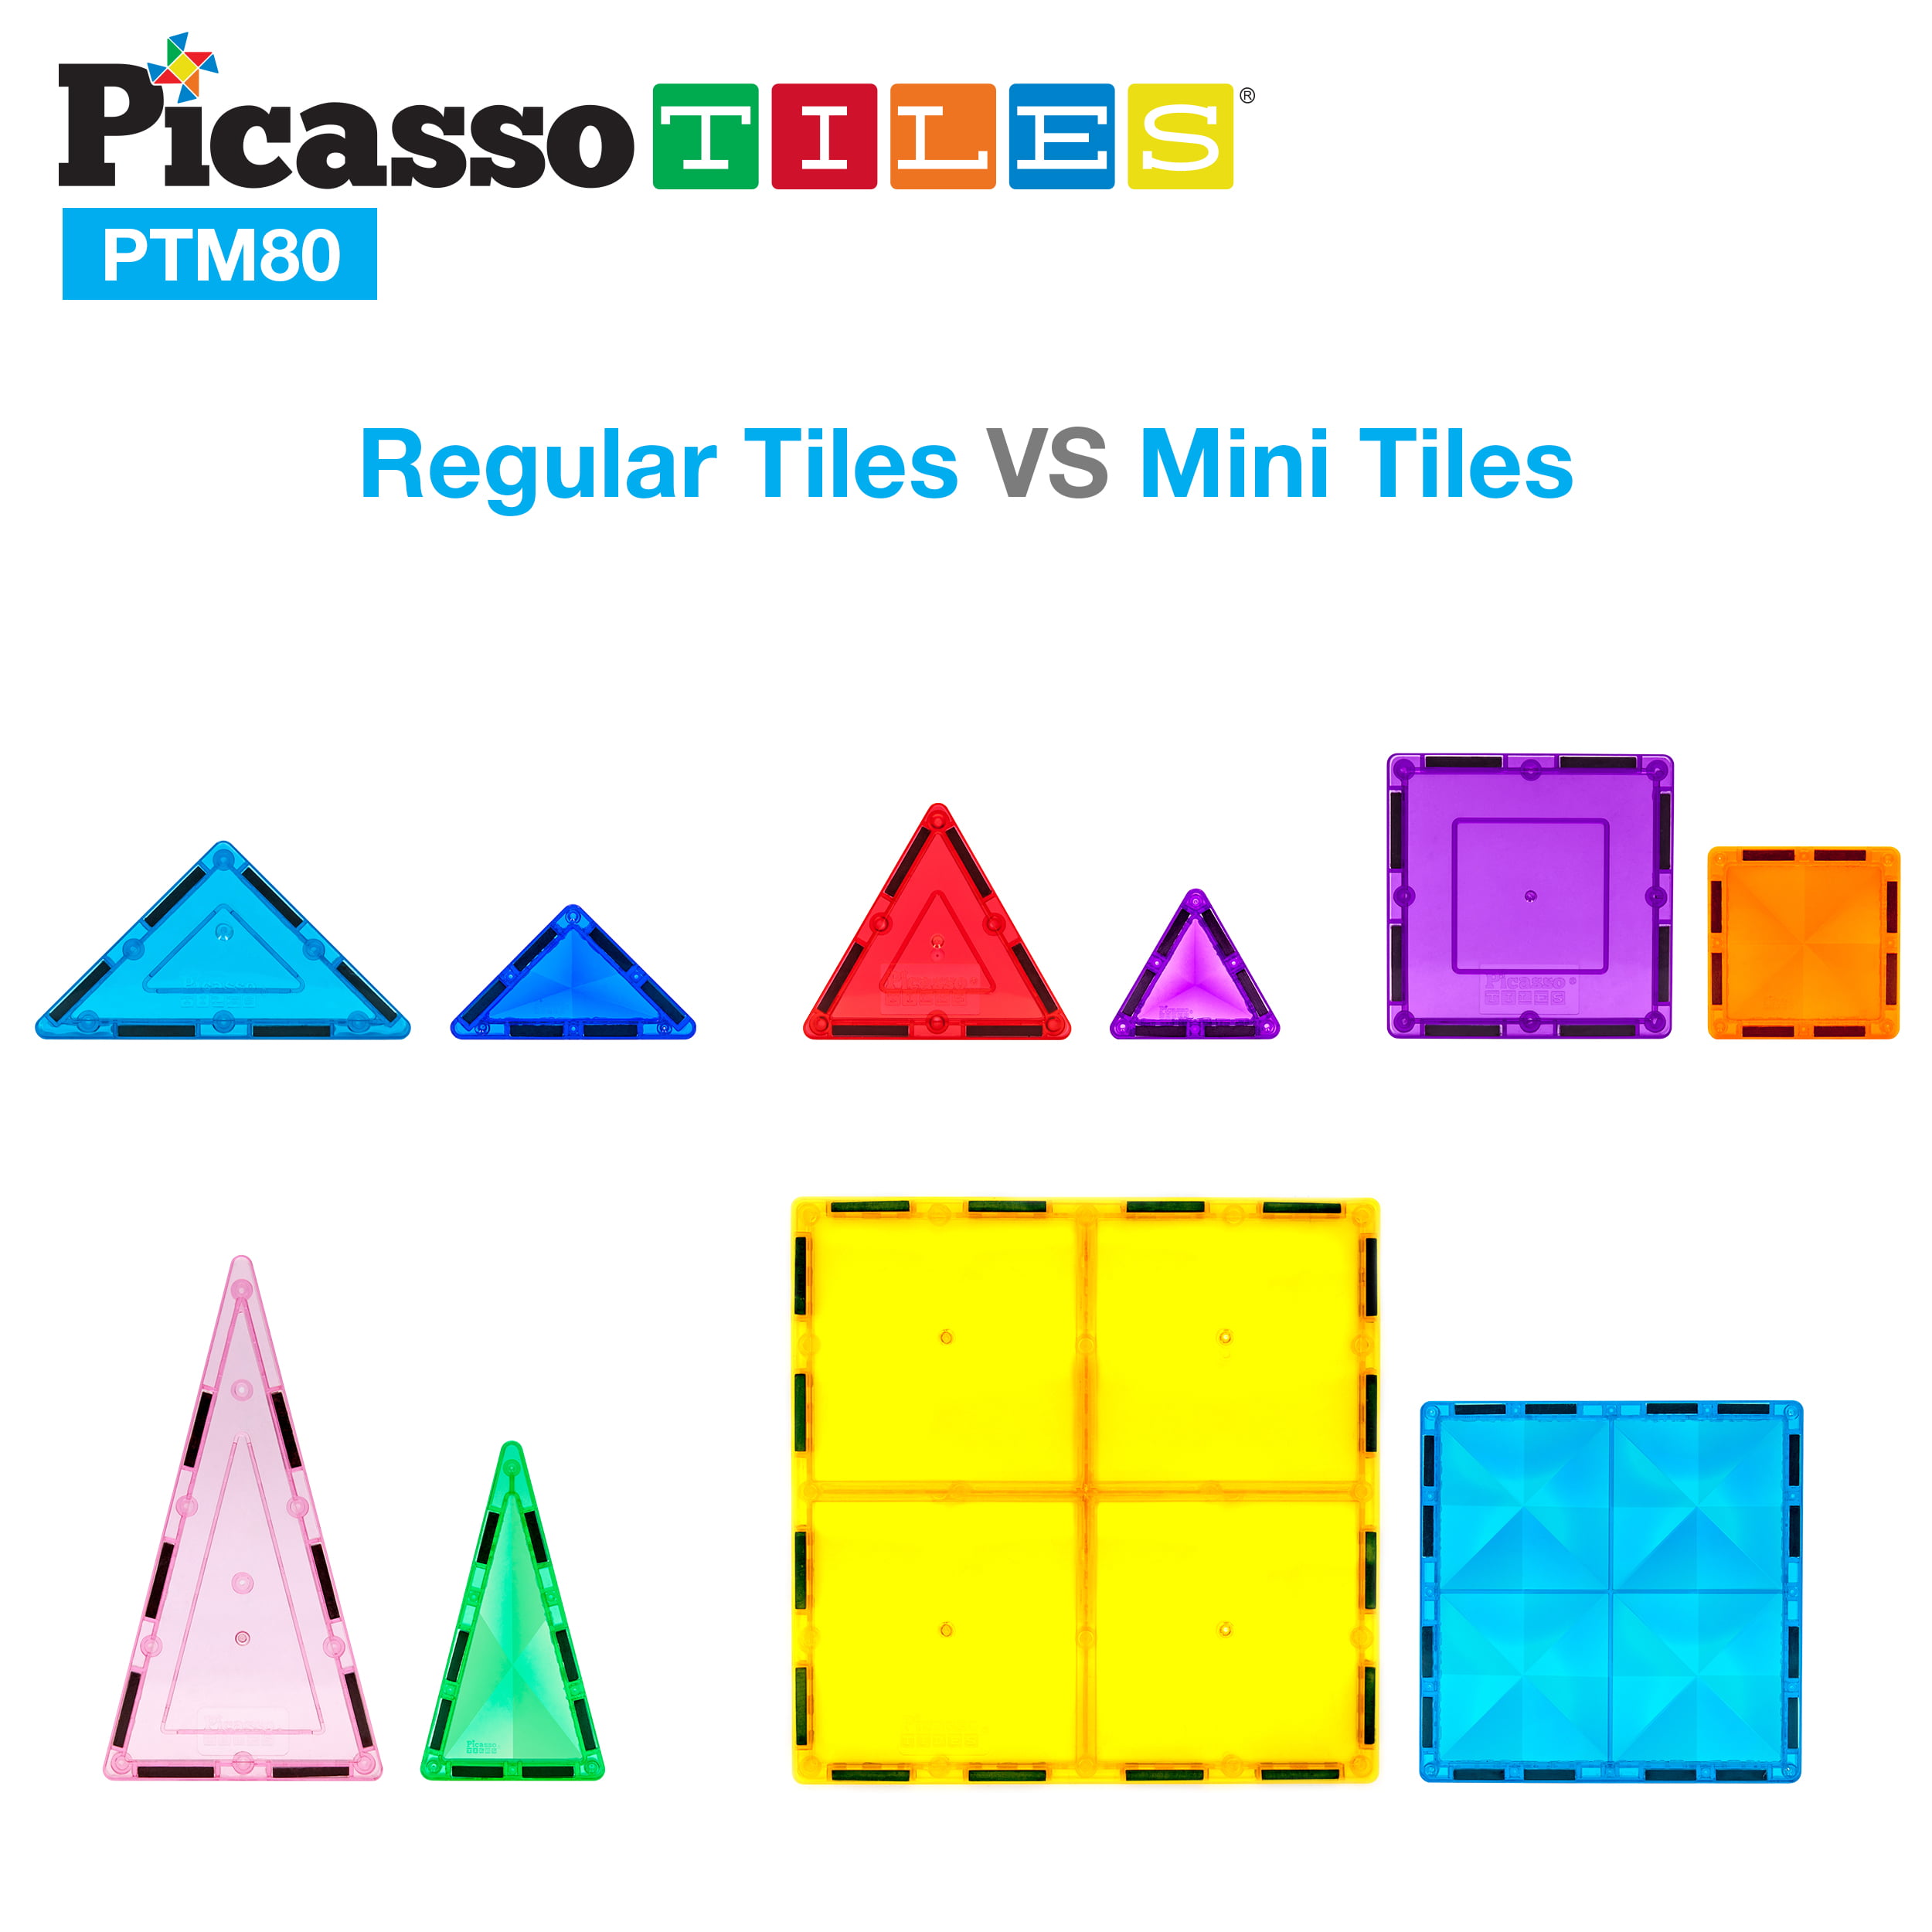 PicassoTiles 80 Piece Magnetic Building Block Mini Diamond Series Travel Size On-The-Go Magnet Construction Toy Set STEM Learning Kit Educational Playset Child Brain Development Stacking Blocks PTM80 